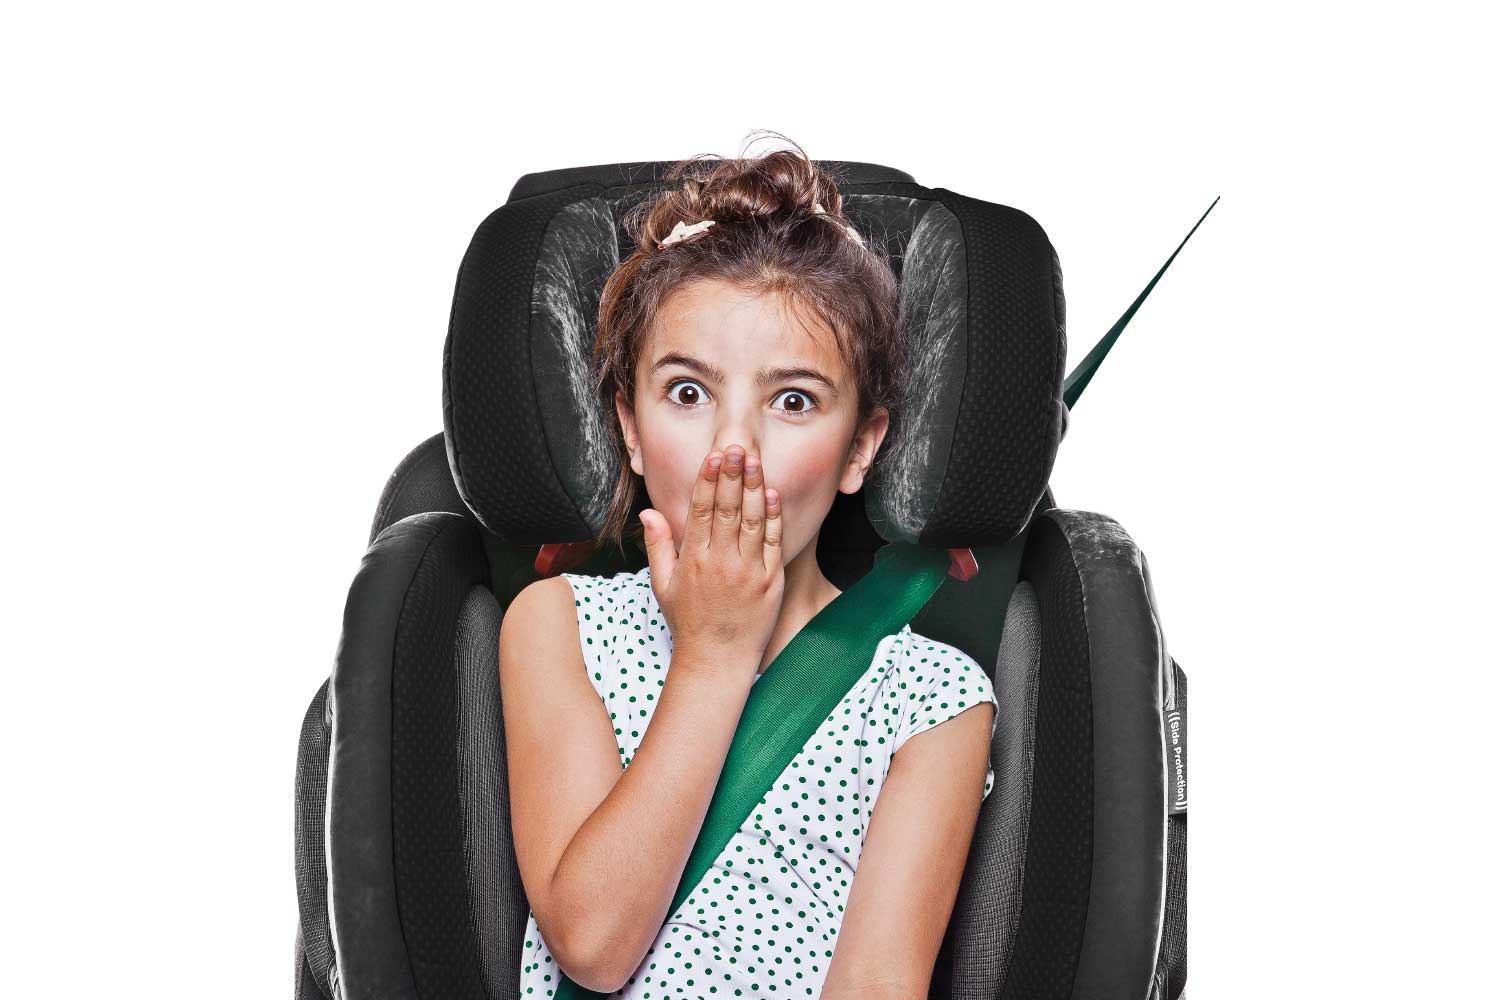 Child Restraints in a vehicle